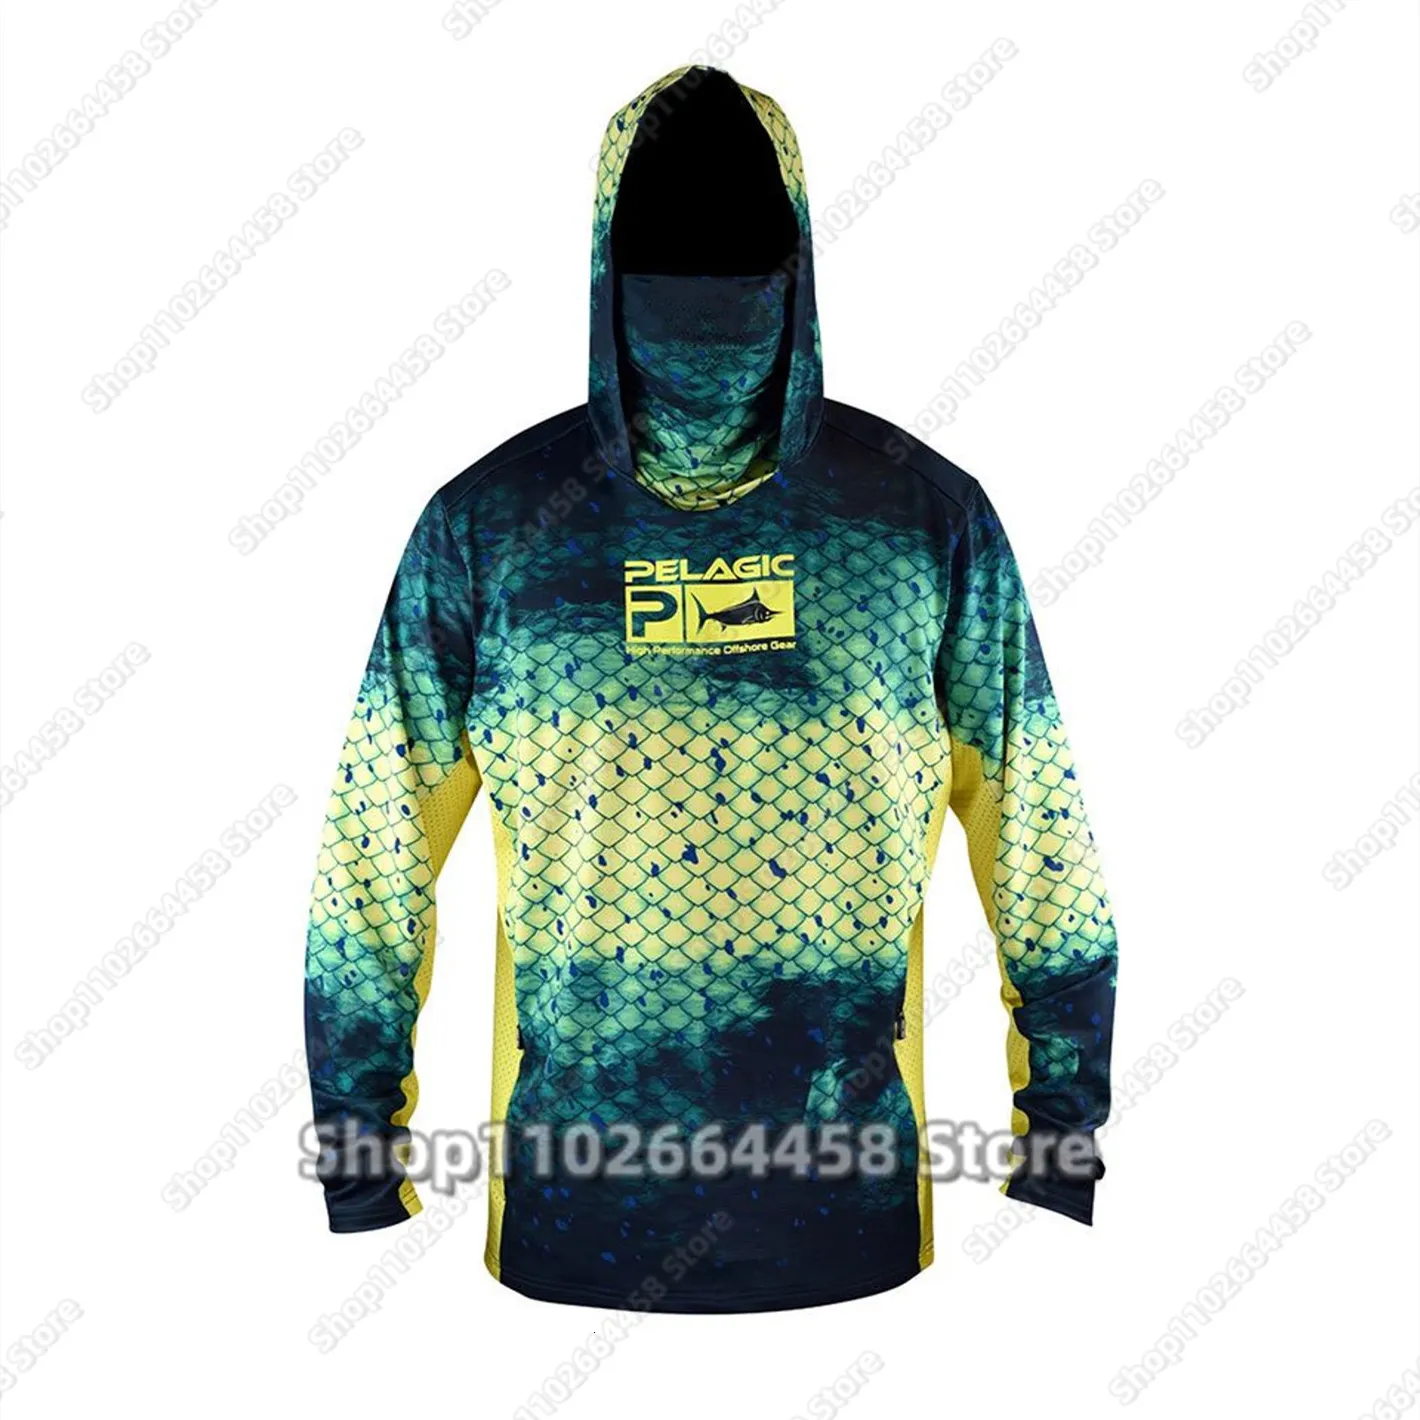 PELAGIC Fishing Hoodie Shirt Mens Long Sleeve Outdoor Voices Long Sleeve  With UV Protection And Face Mask Camisa De Pesca 230814 From Zhong07,  $16.96